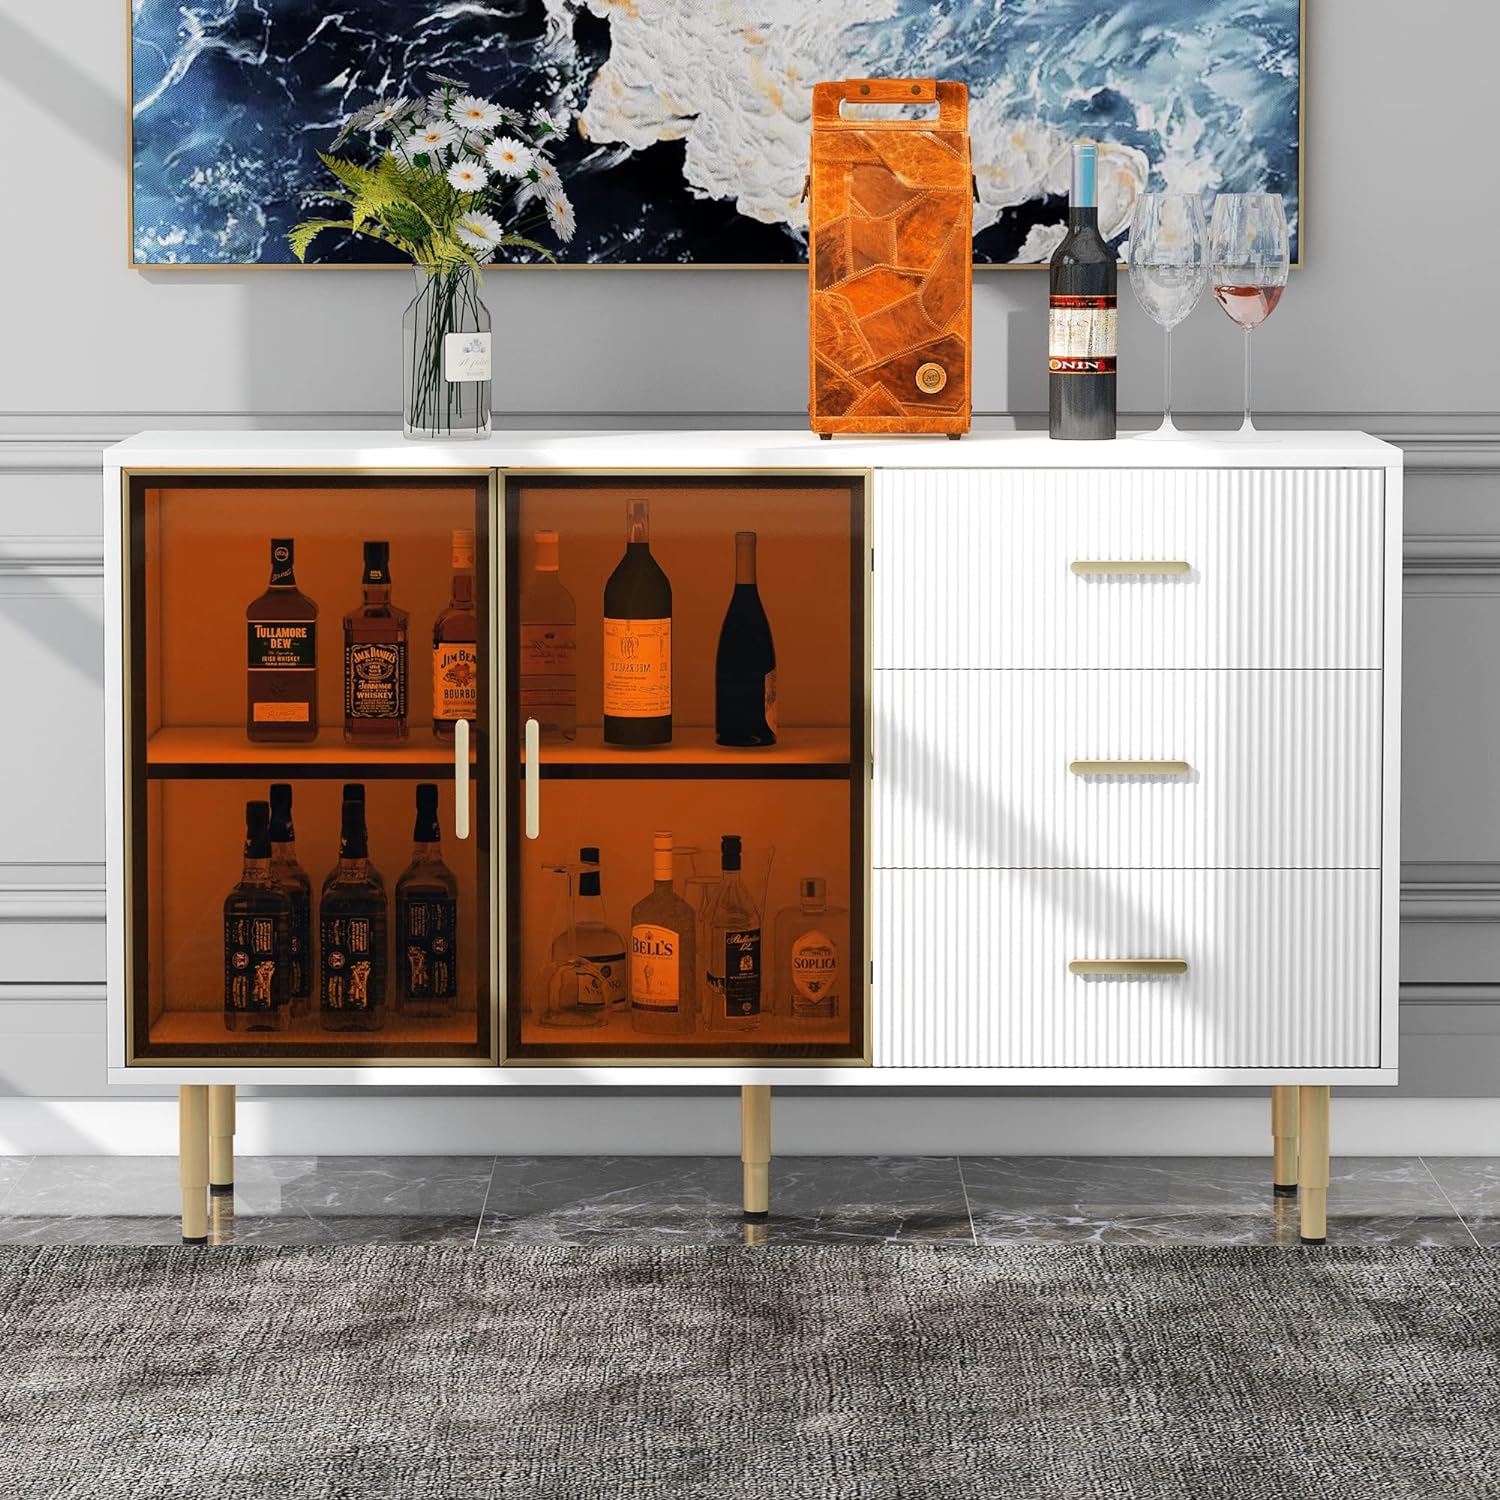 WILLIAMSPACE 60 Sideboard Buffet Cabinet, Mid-Century Modern Cabinet with Marble Sticker Tabletop and Amber-Yellow Tempered Glass Doors, Storage Cabinet with Gold Metal Legs & Handles - White